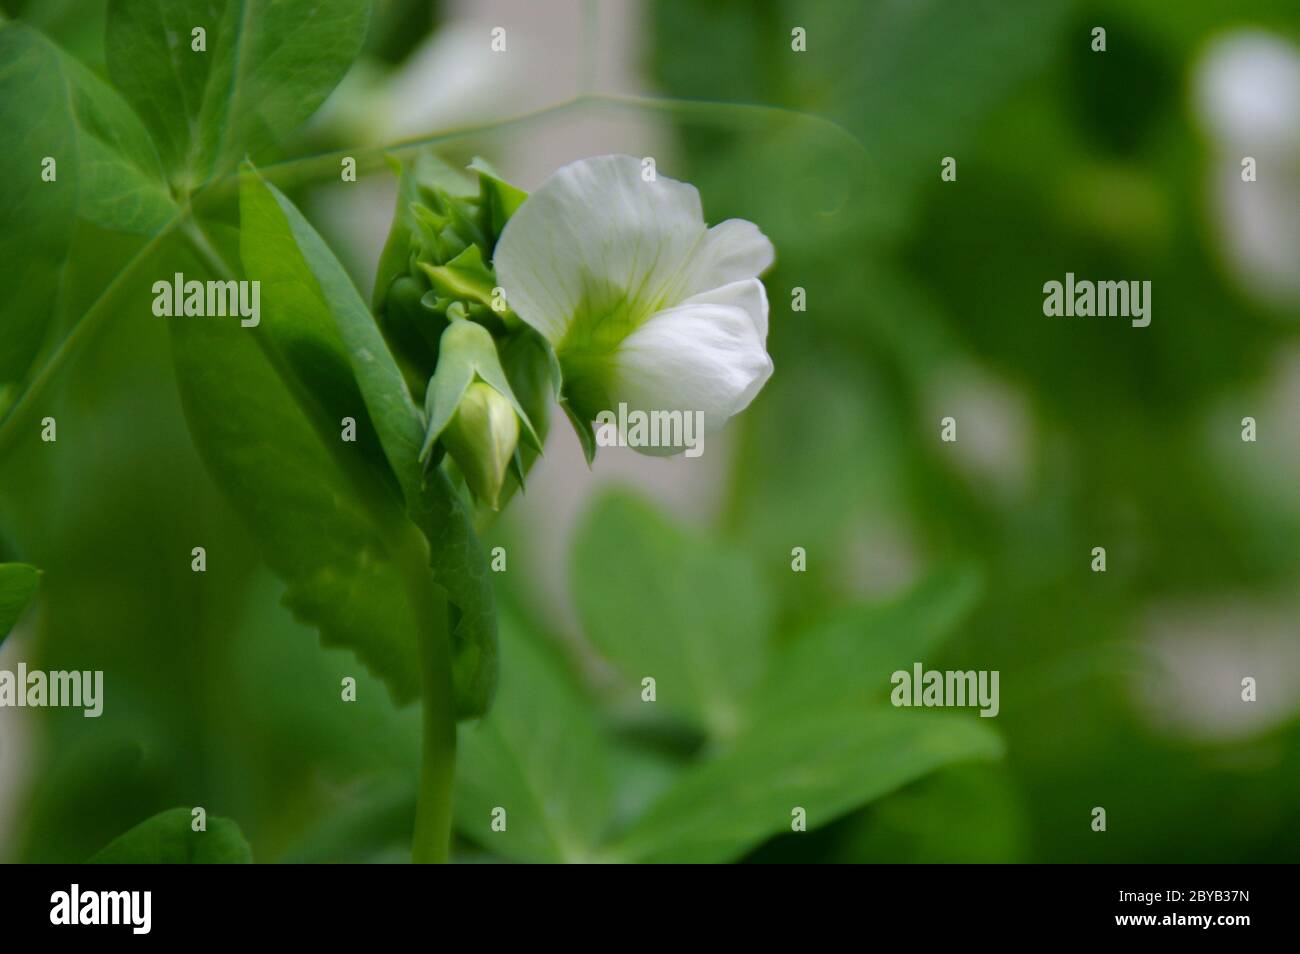 Leaves and flowers of green peas in the home garden. Flowering plants in spring. Stock Photo